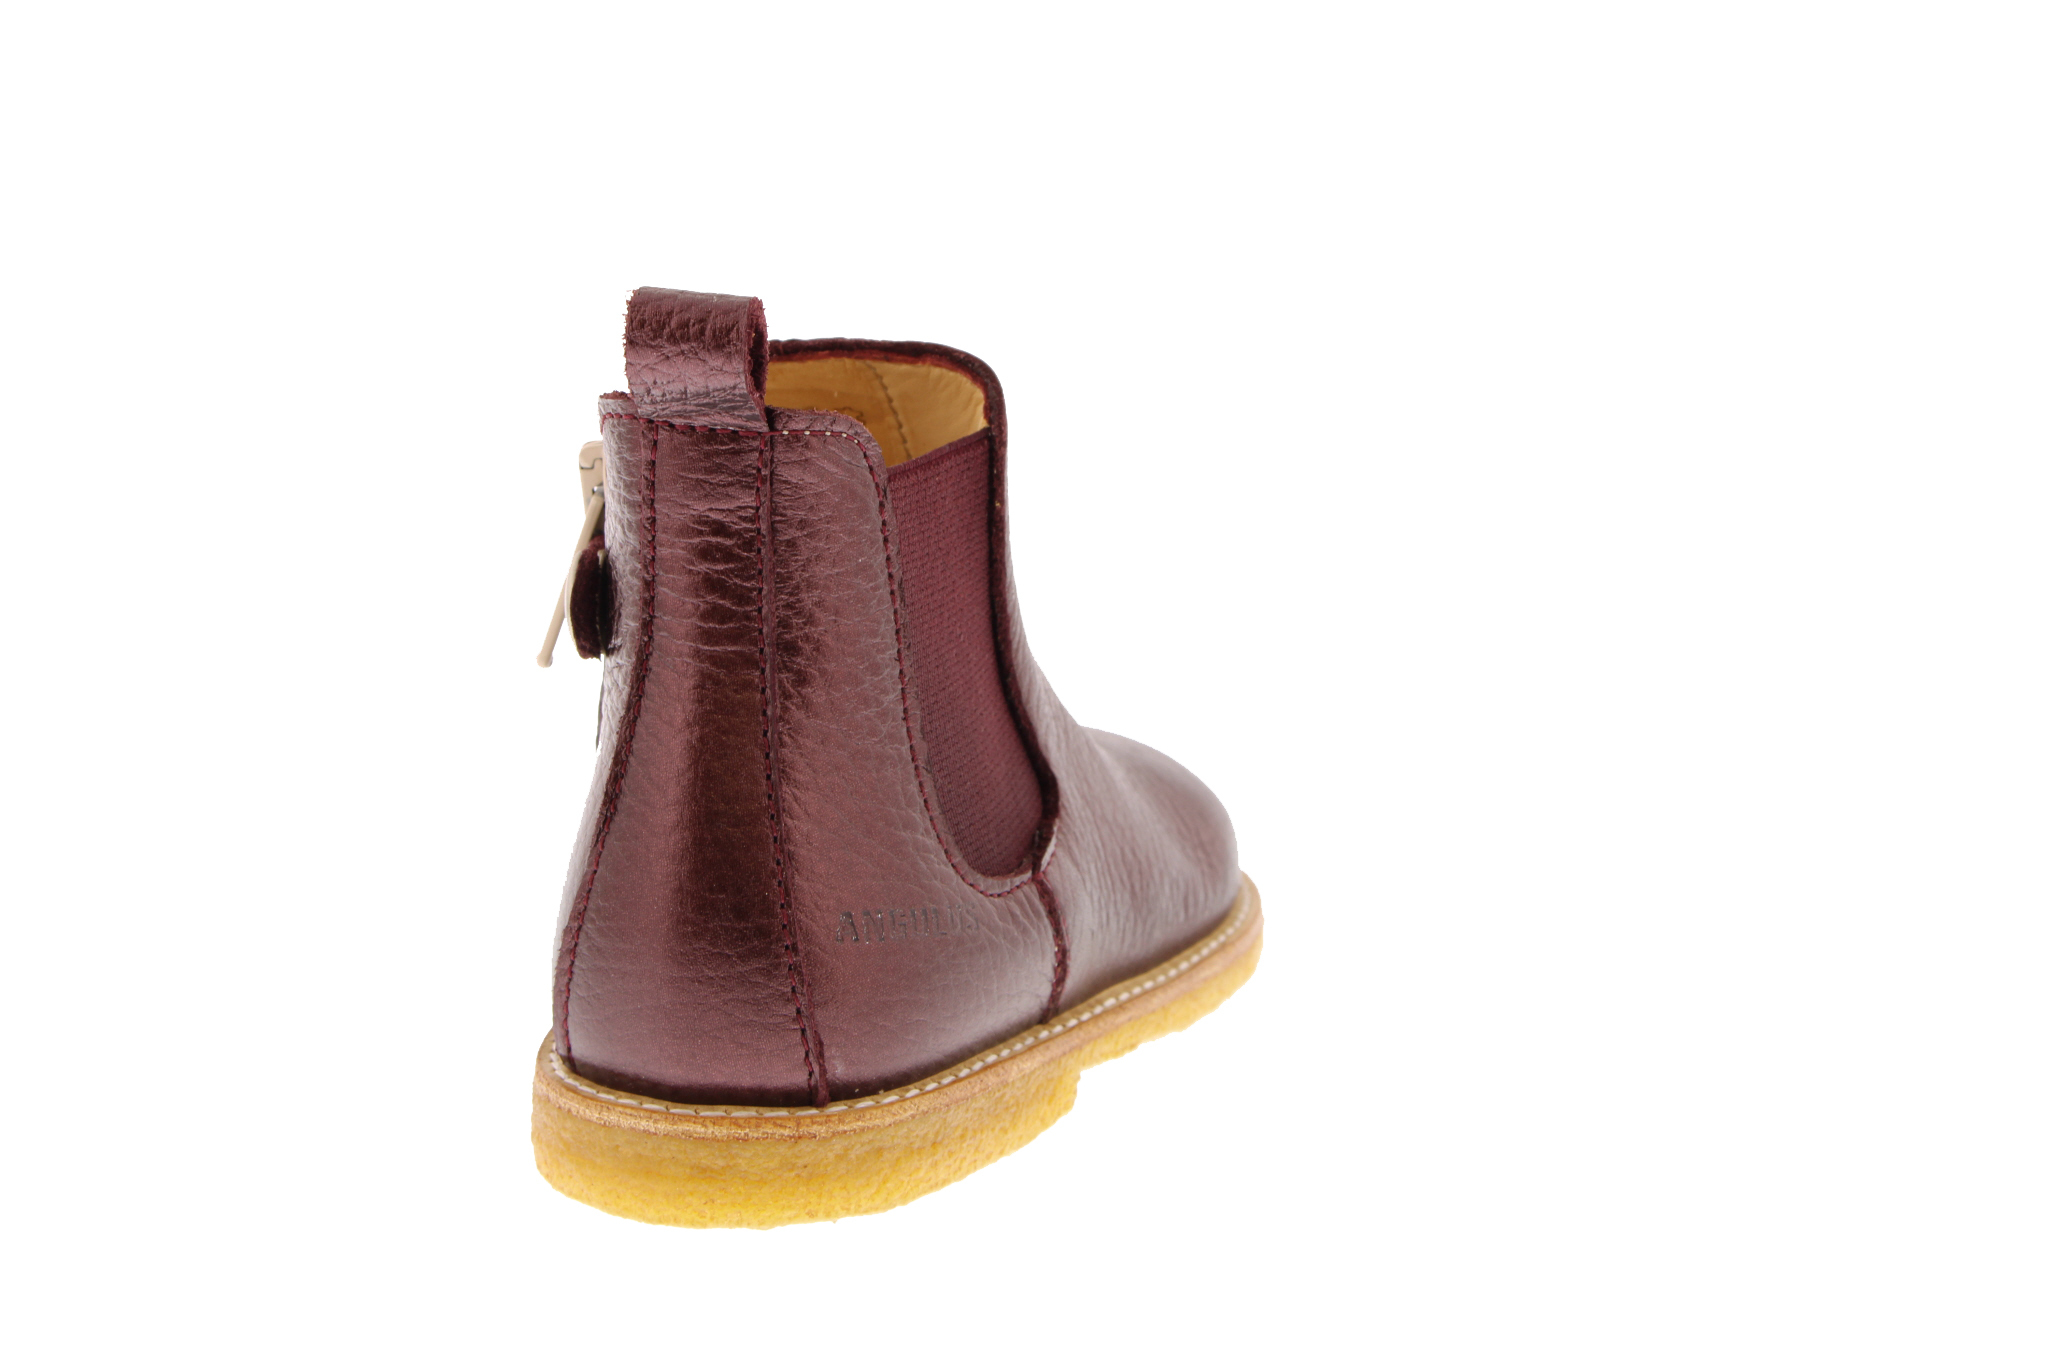 Boots | Angulus | Bordeaux | 6025-101 | Free delivery Carmi shoes and fashion